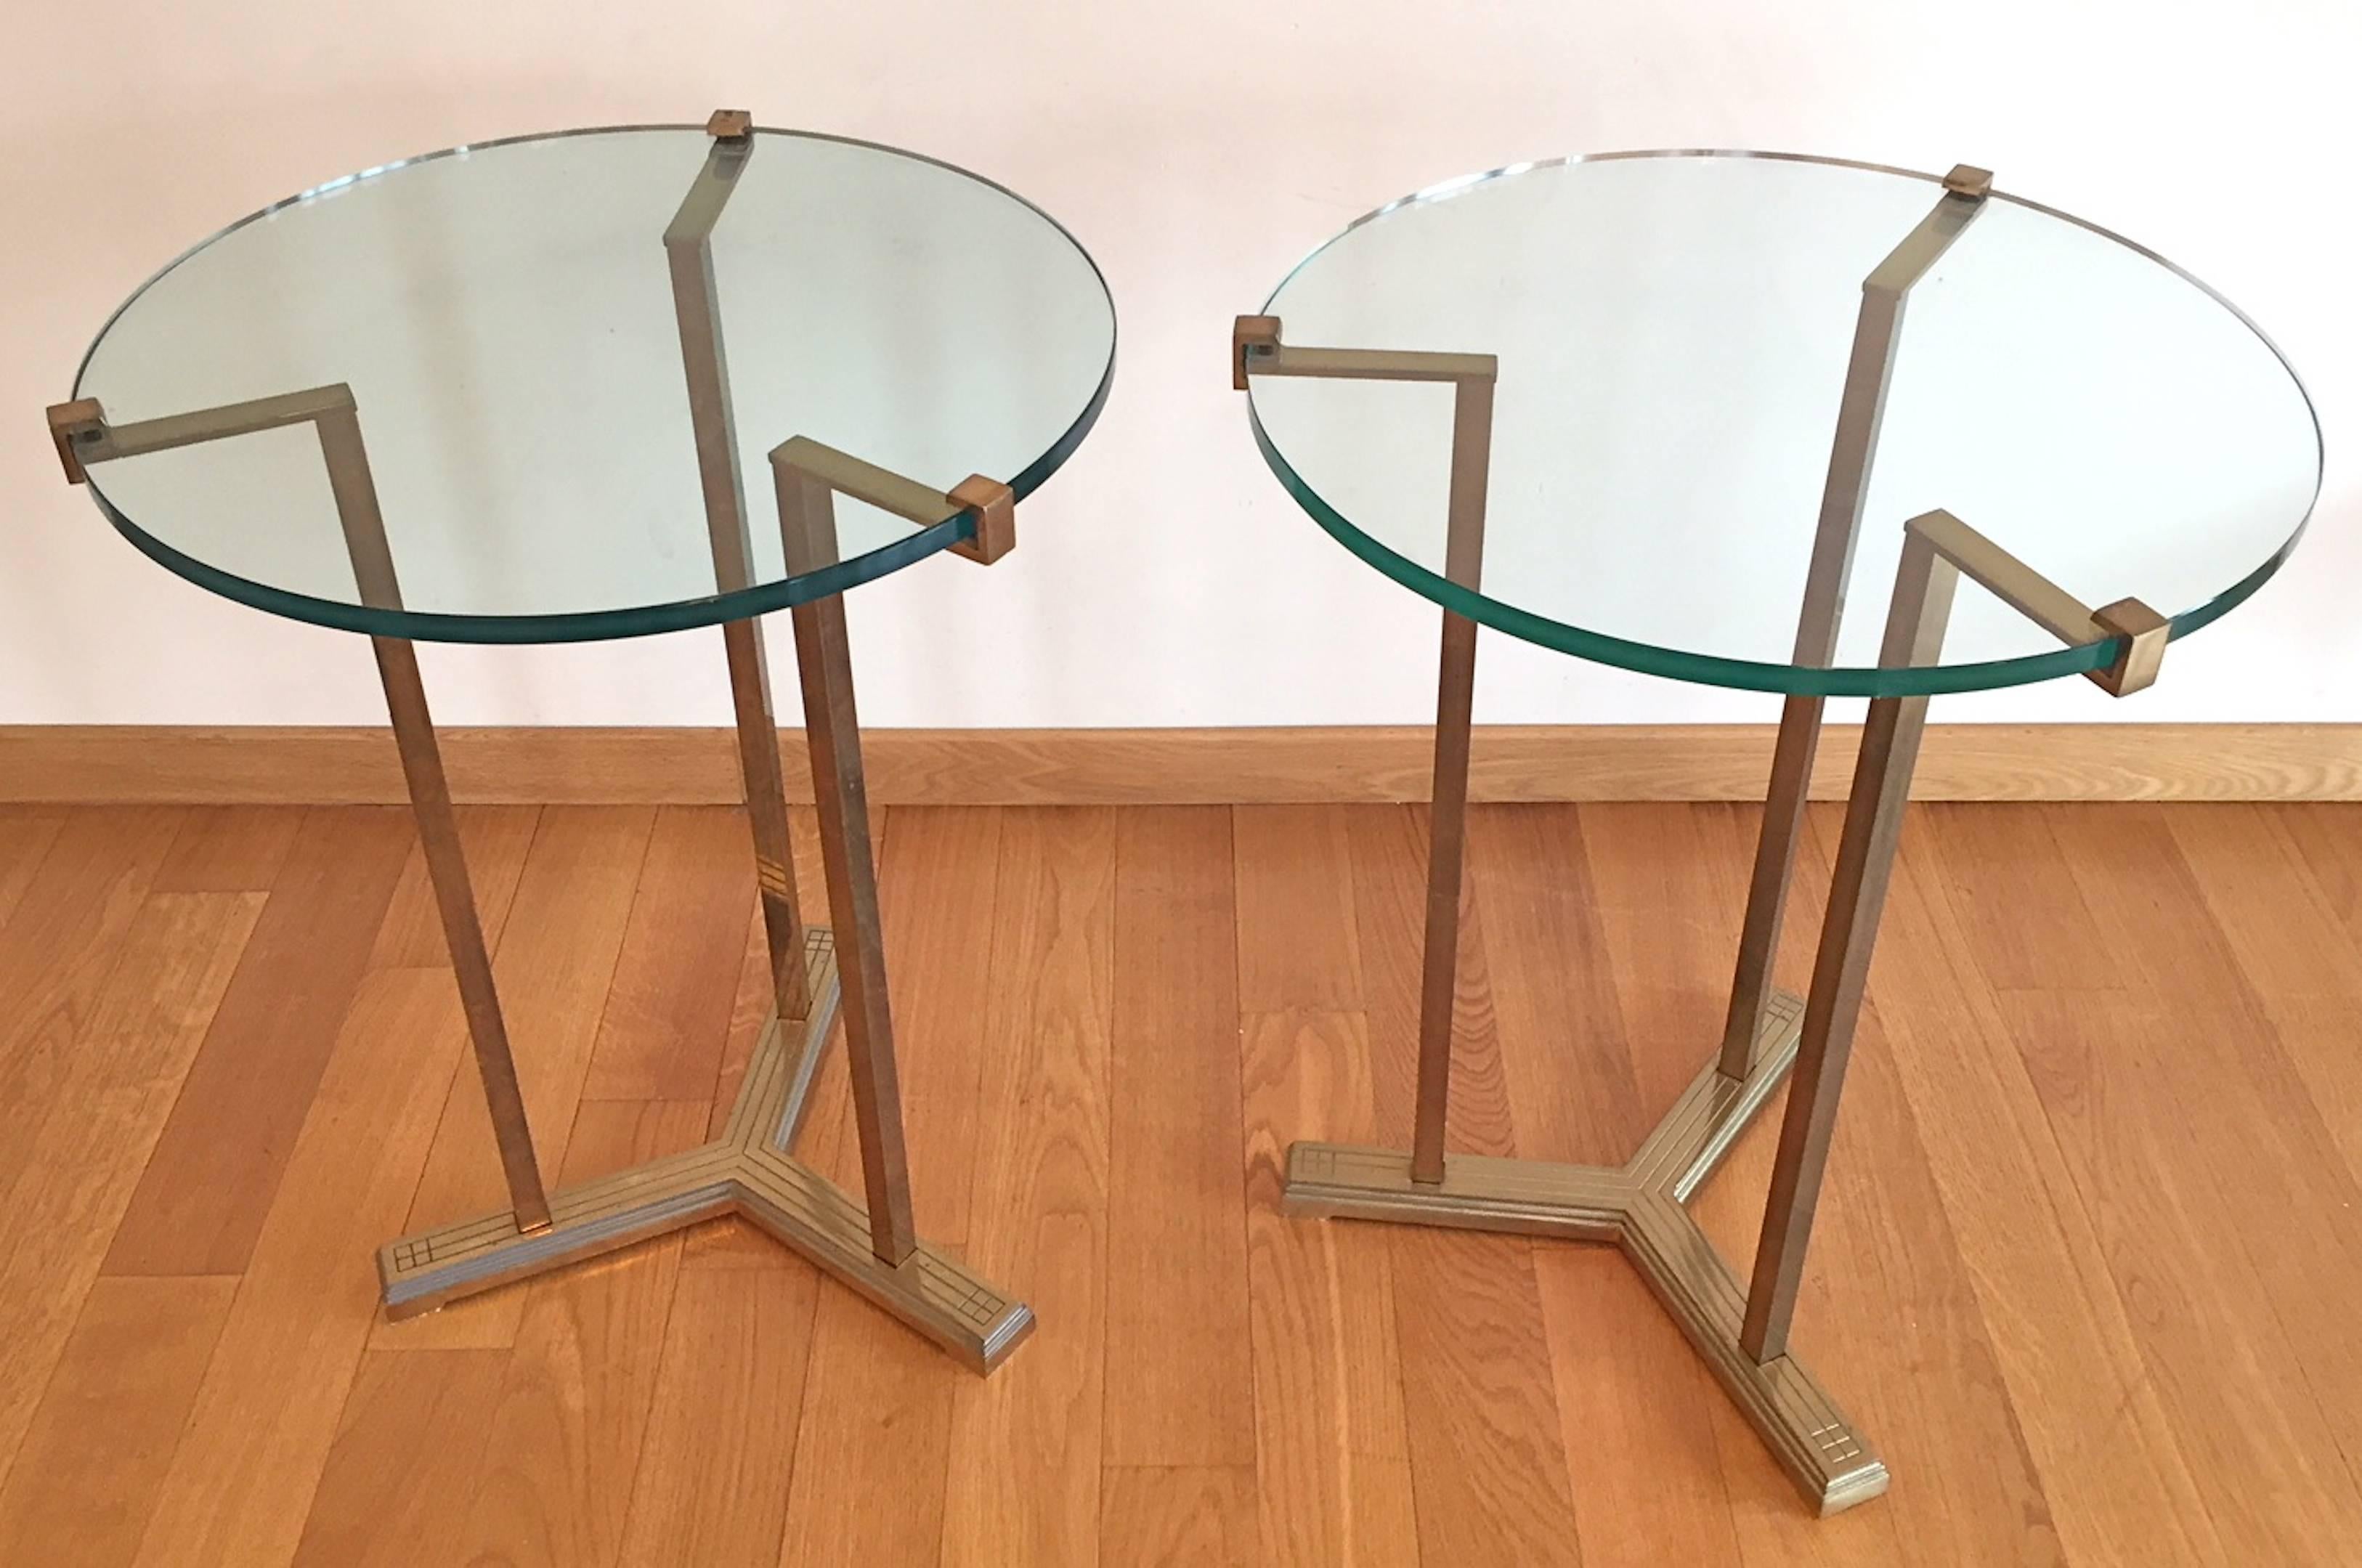 An elegant pair of French side tables, manufactured in the 1970s. Glass and brass,
Excellent condition.